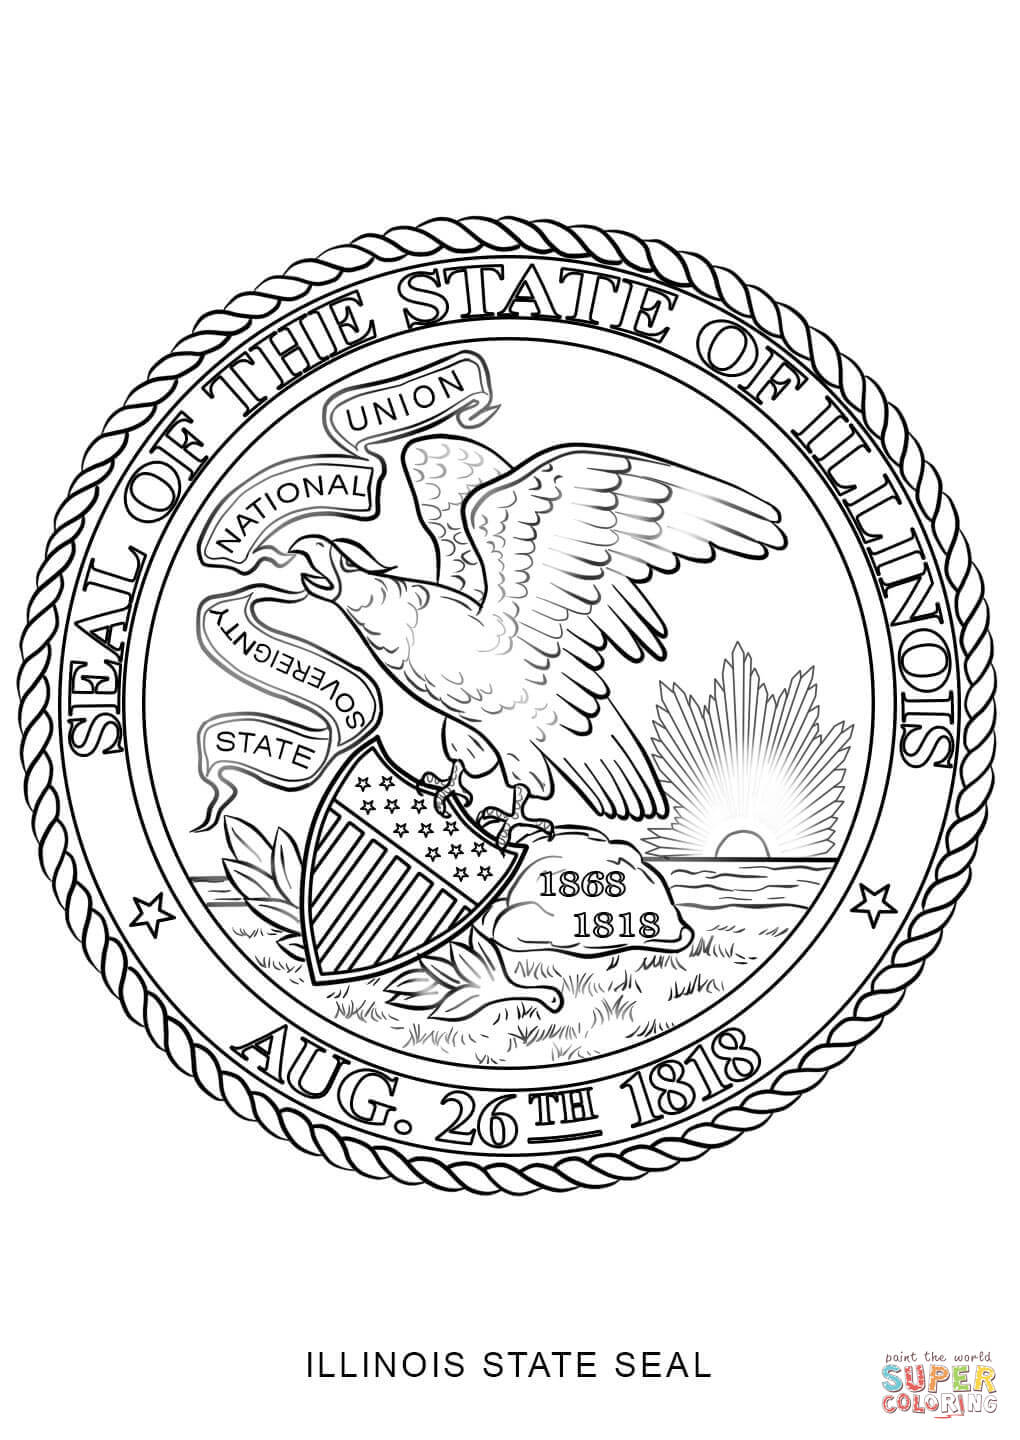 Illinois State Seal coloring page | Free Printable Coloring Pages